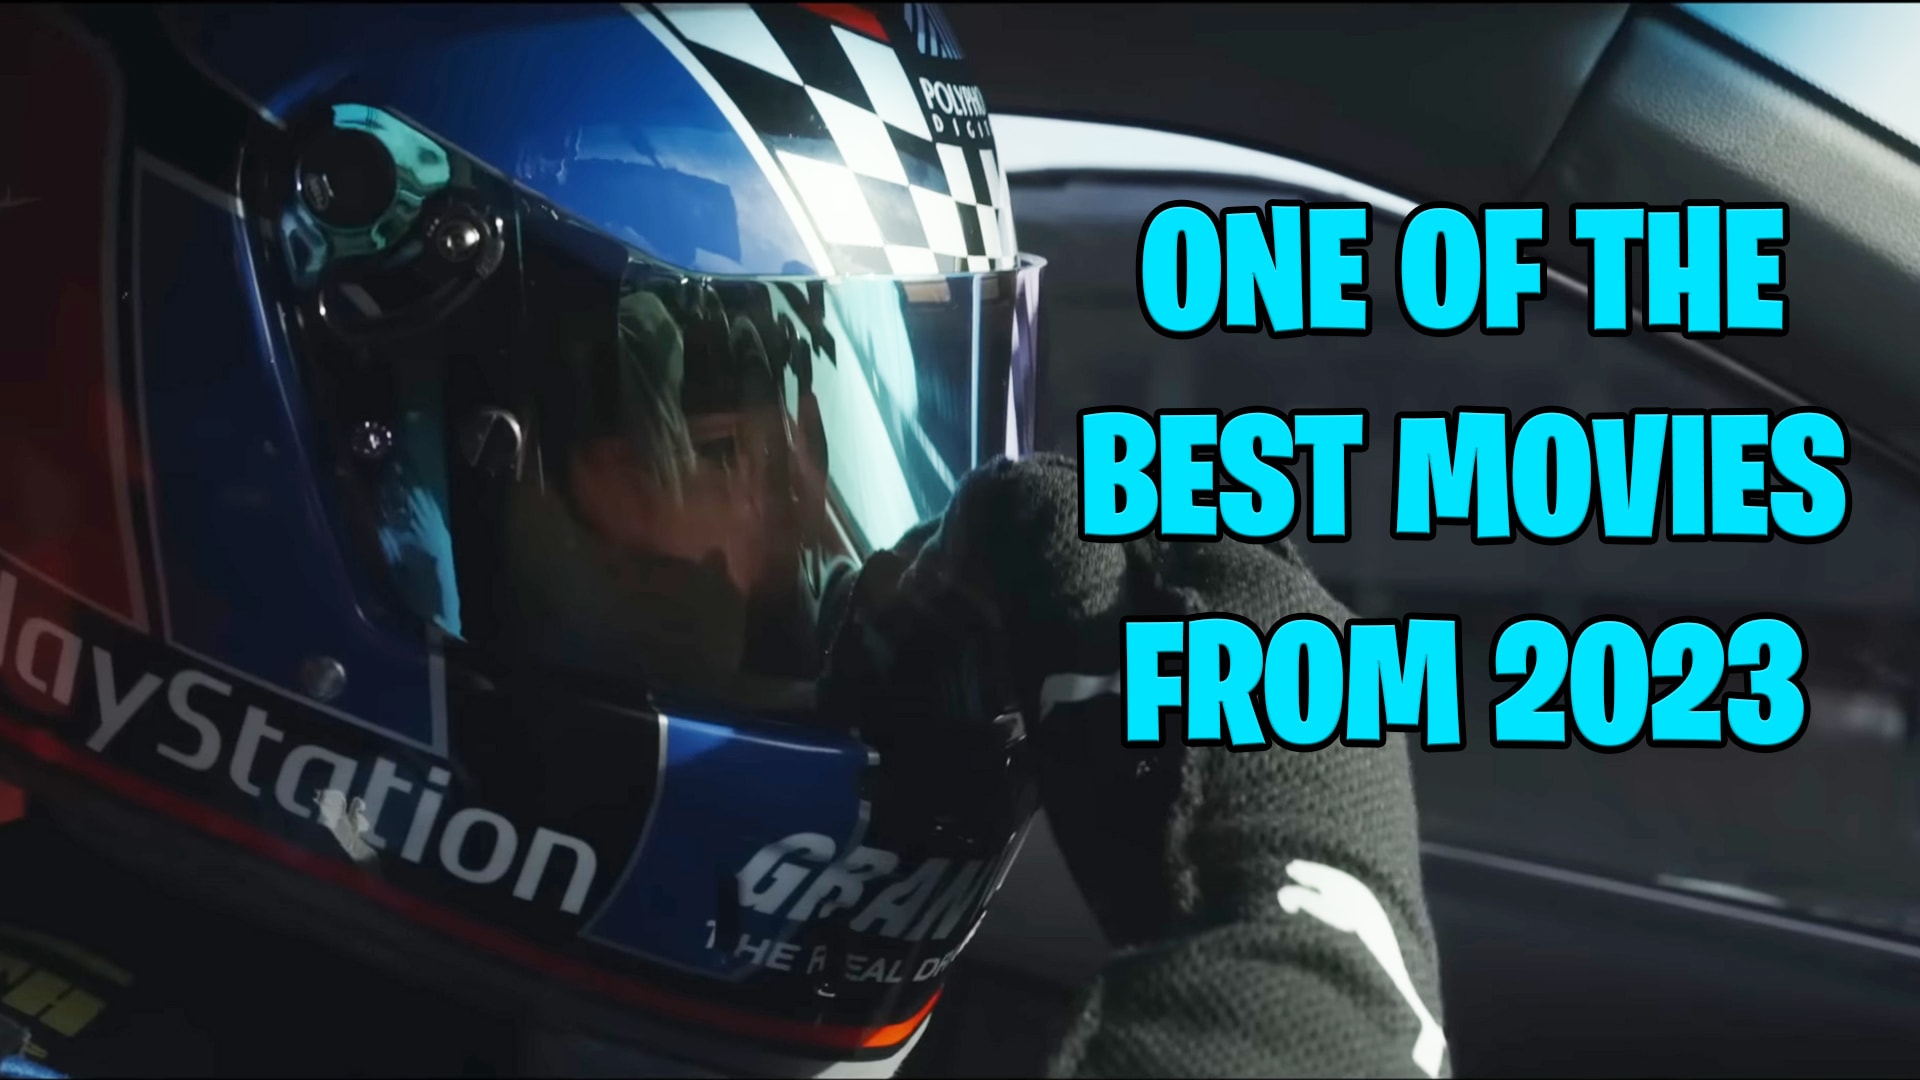 Gran Turismo Movie Review: One of the Most Gripping and Exciting Flicks of the Year